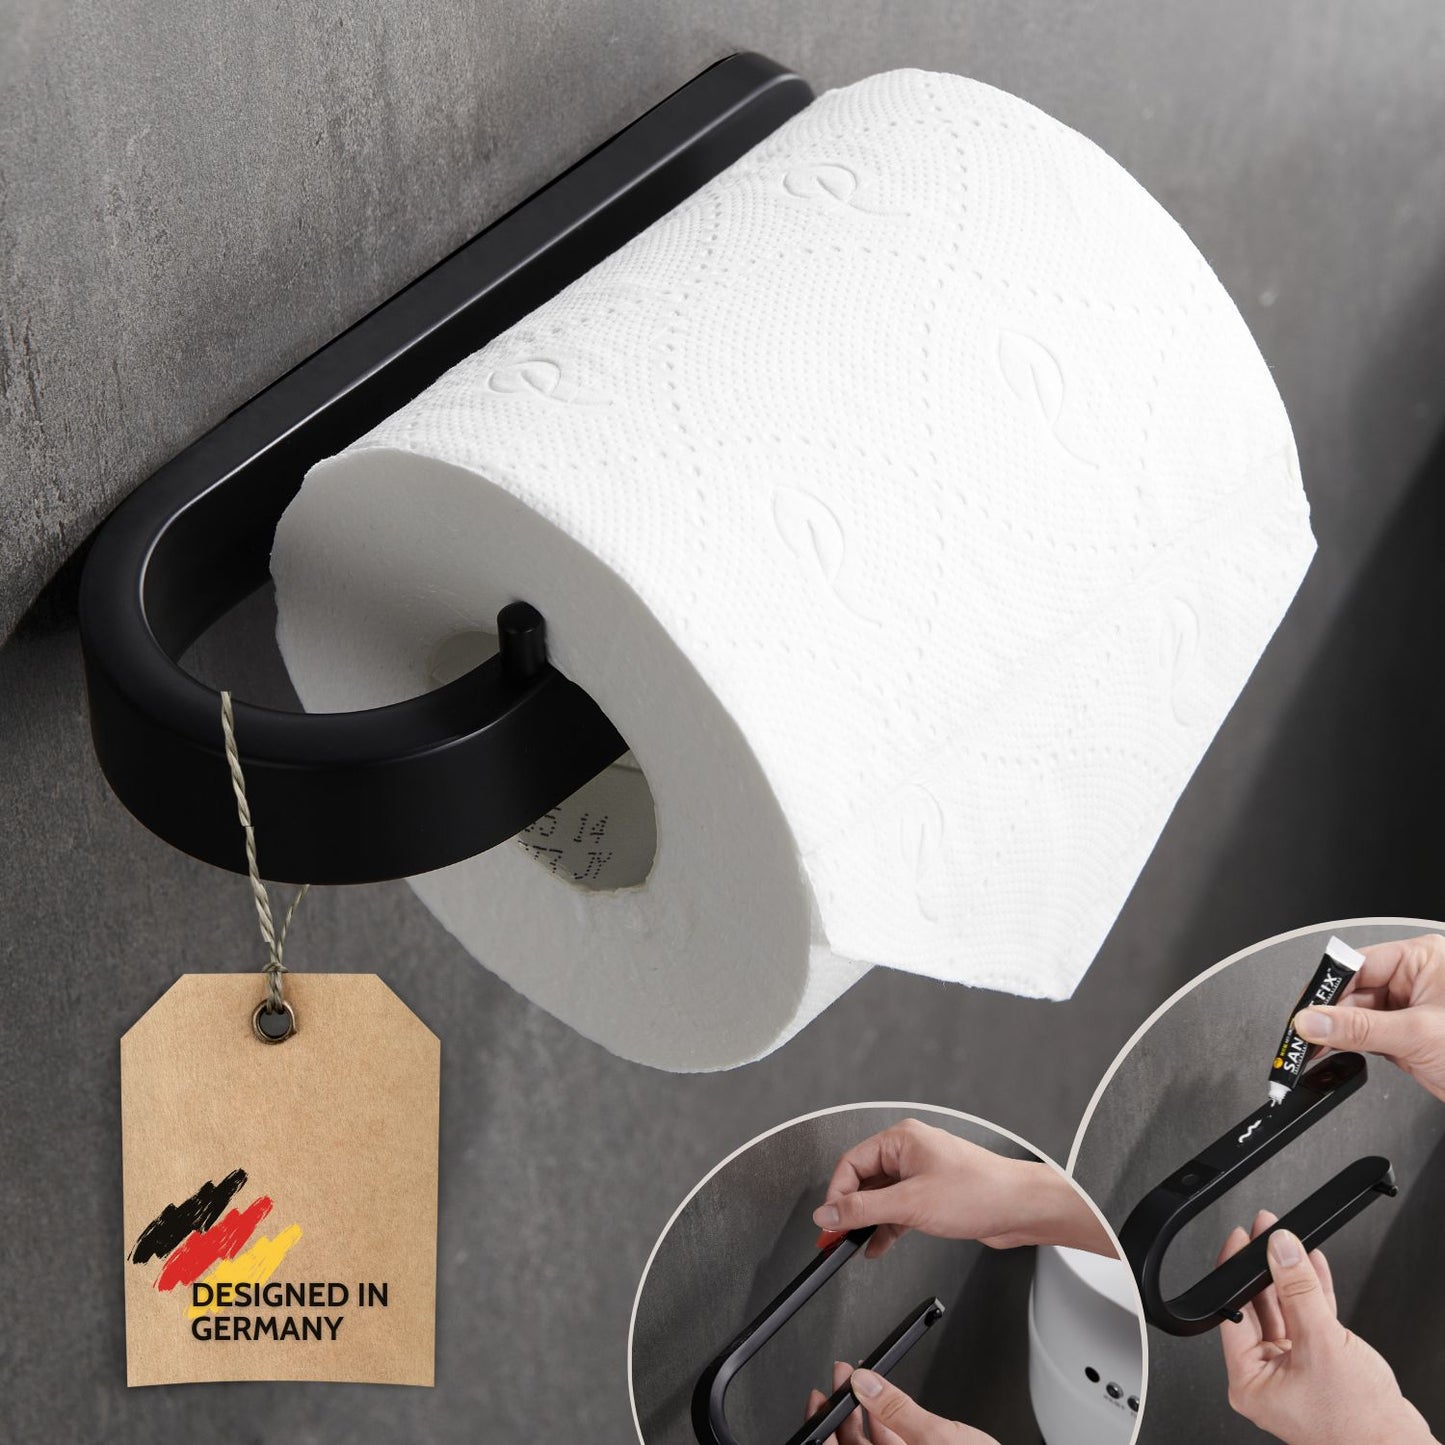 Curved stainless steel toilet roll holder